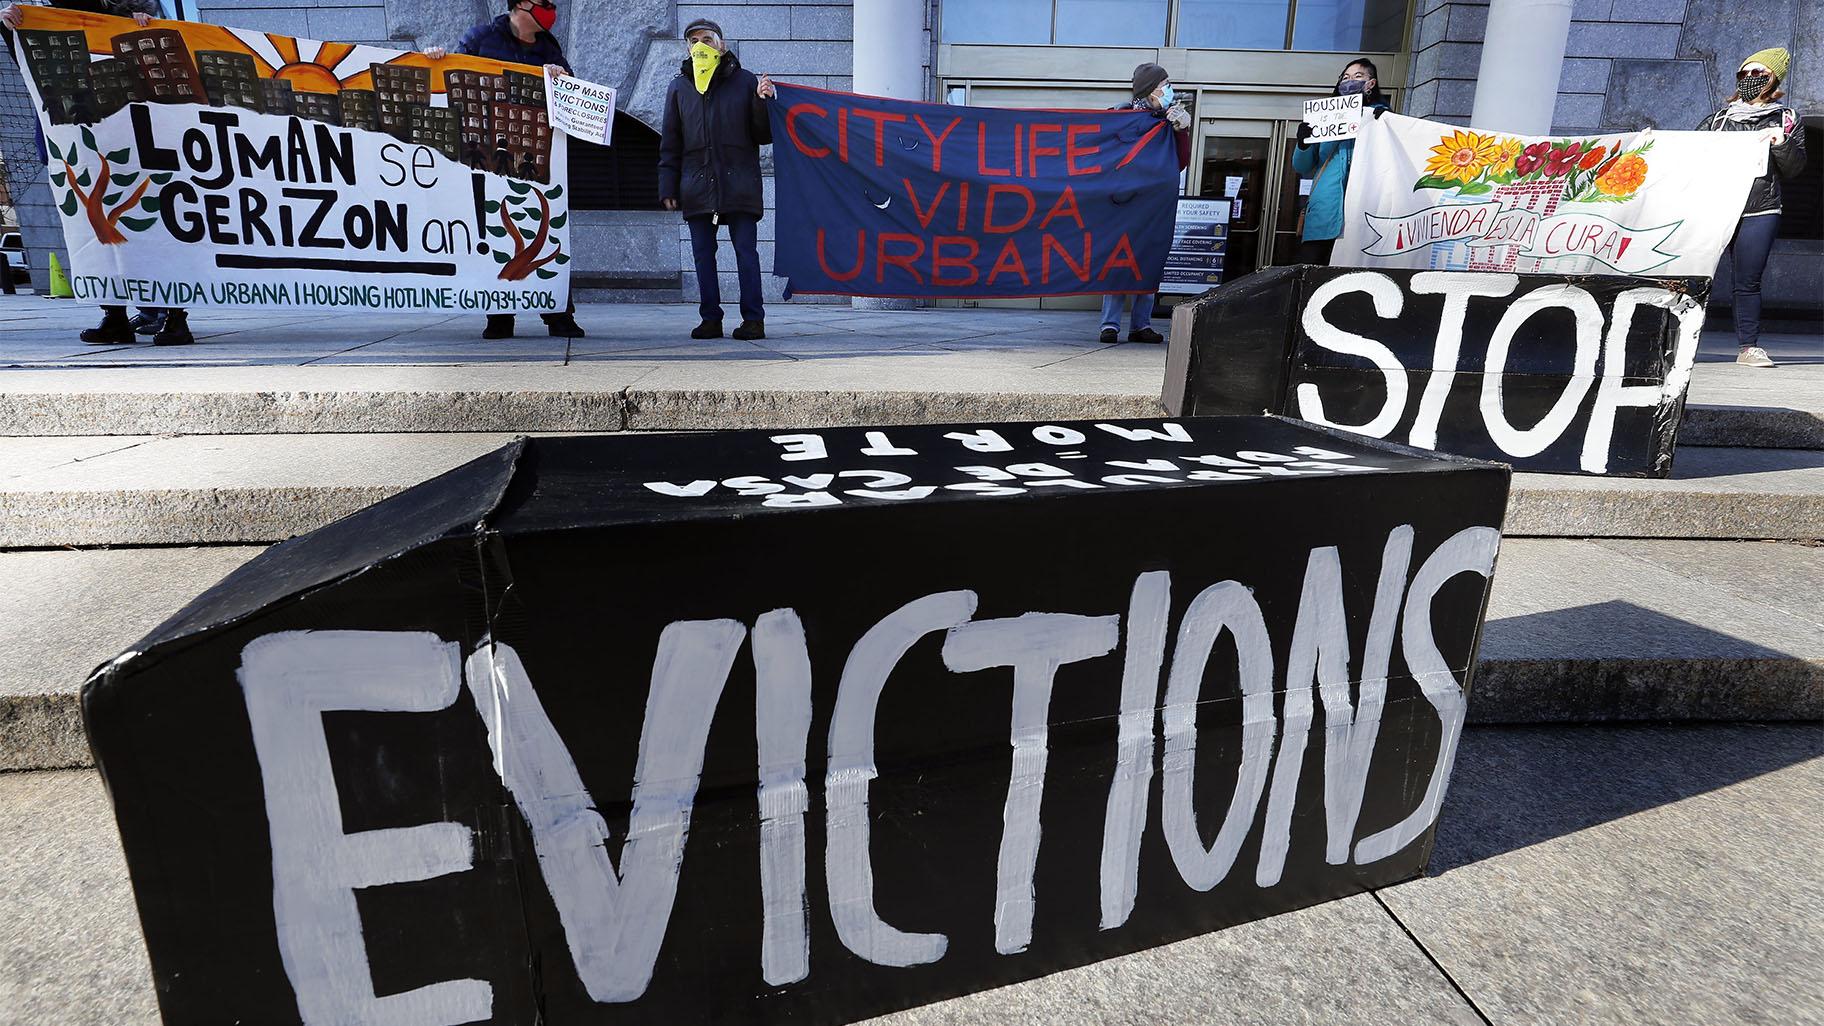 FILE - In this Jan. 13, 2021, file photo, tenants' rights advocates demonstrate in front of the Edward W. Brooke Courthouse in Boston. (AP Photo / Michael Dwyer, File)